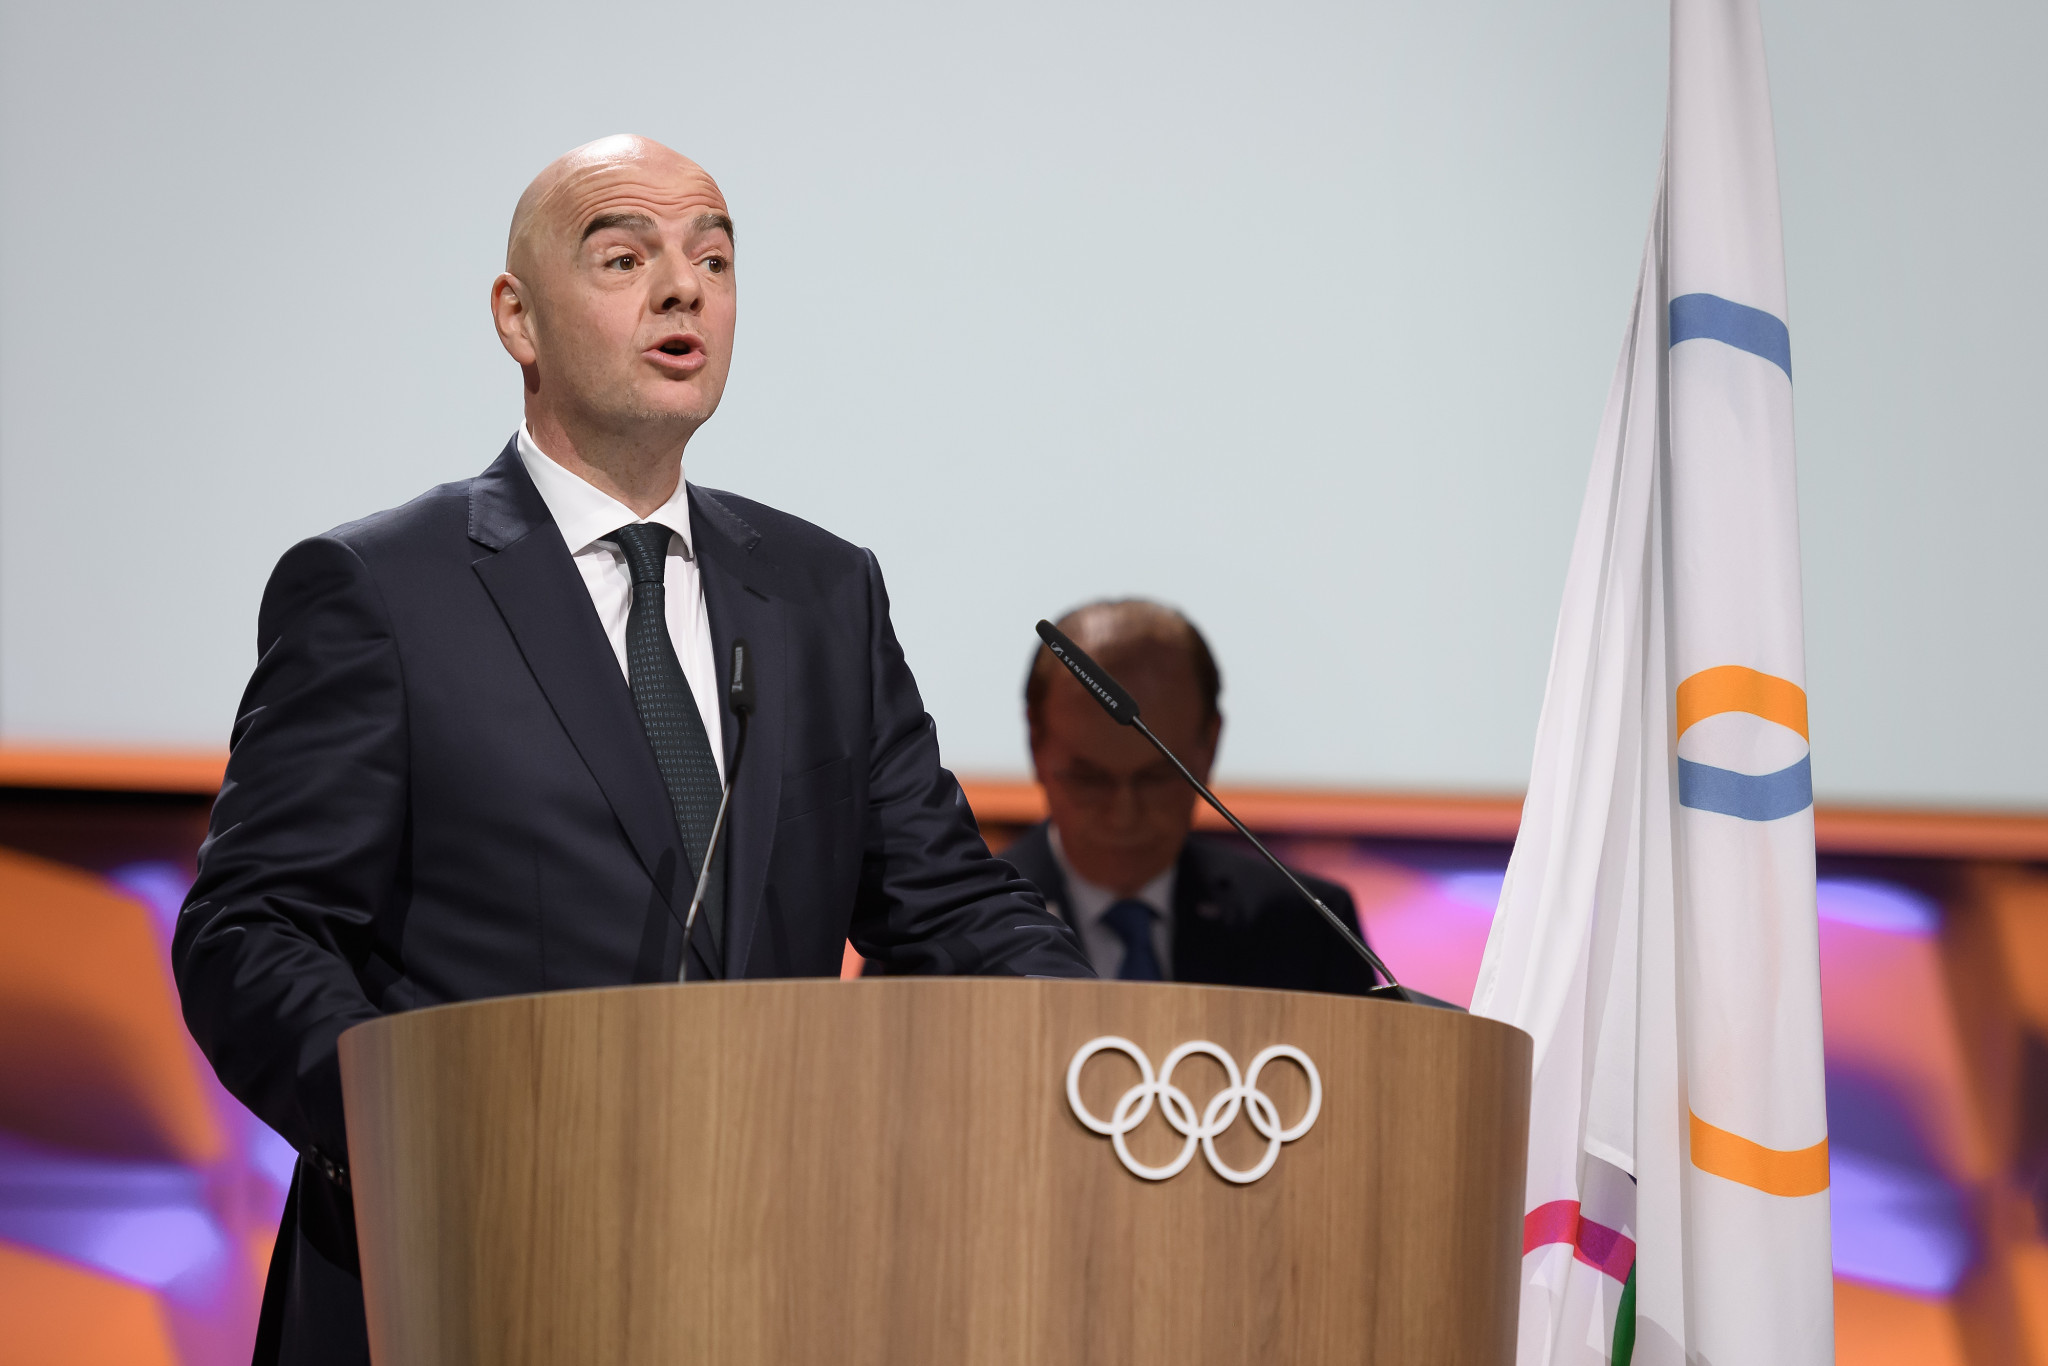 Gianni Infantino was among the three members elected at the IOC Session ©Getty Images